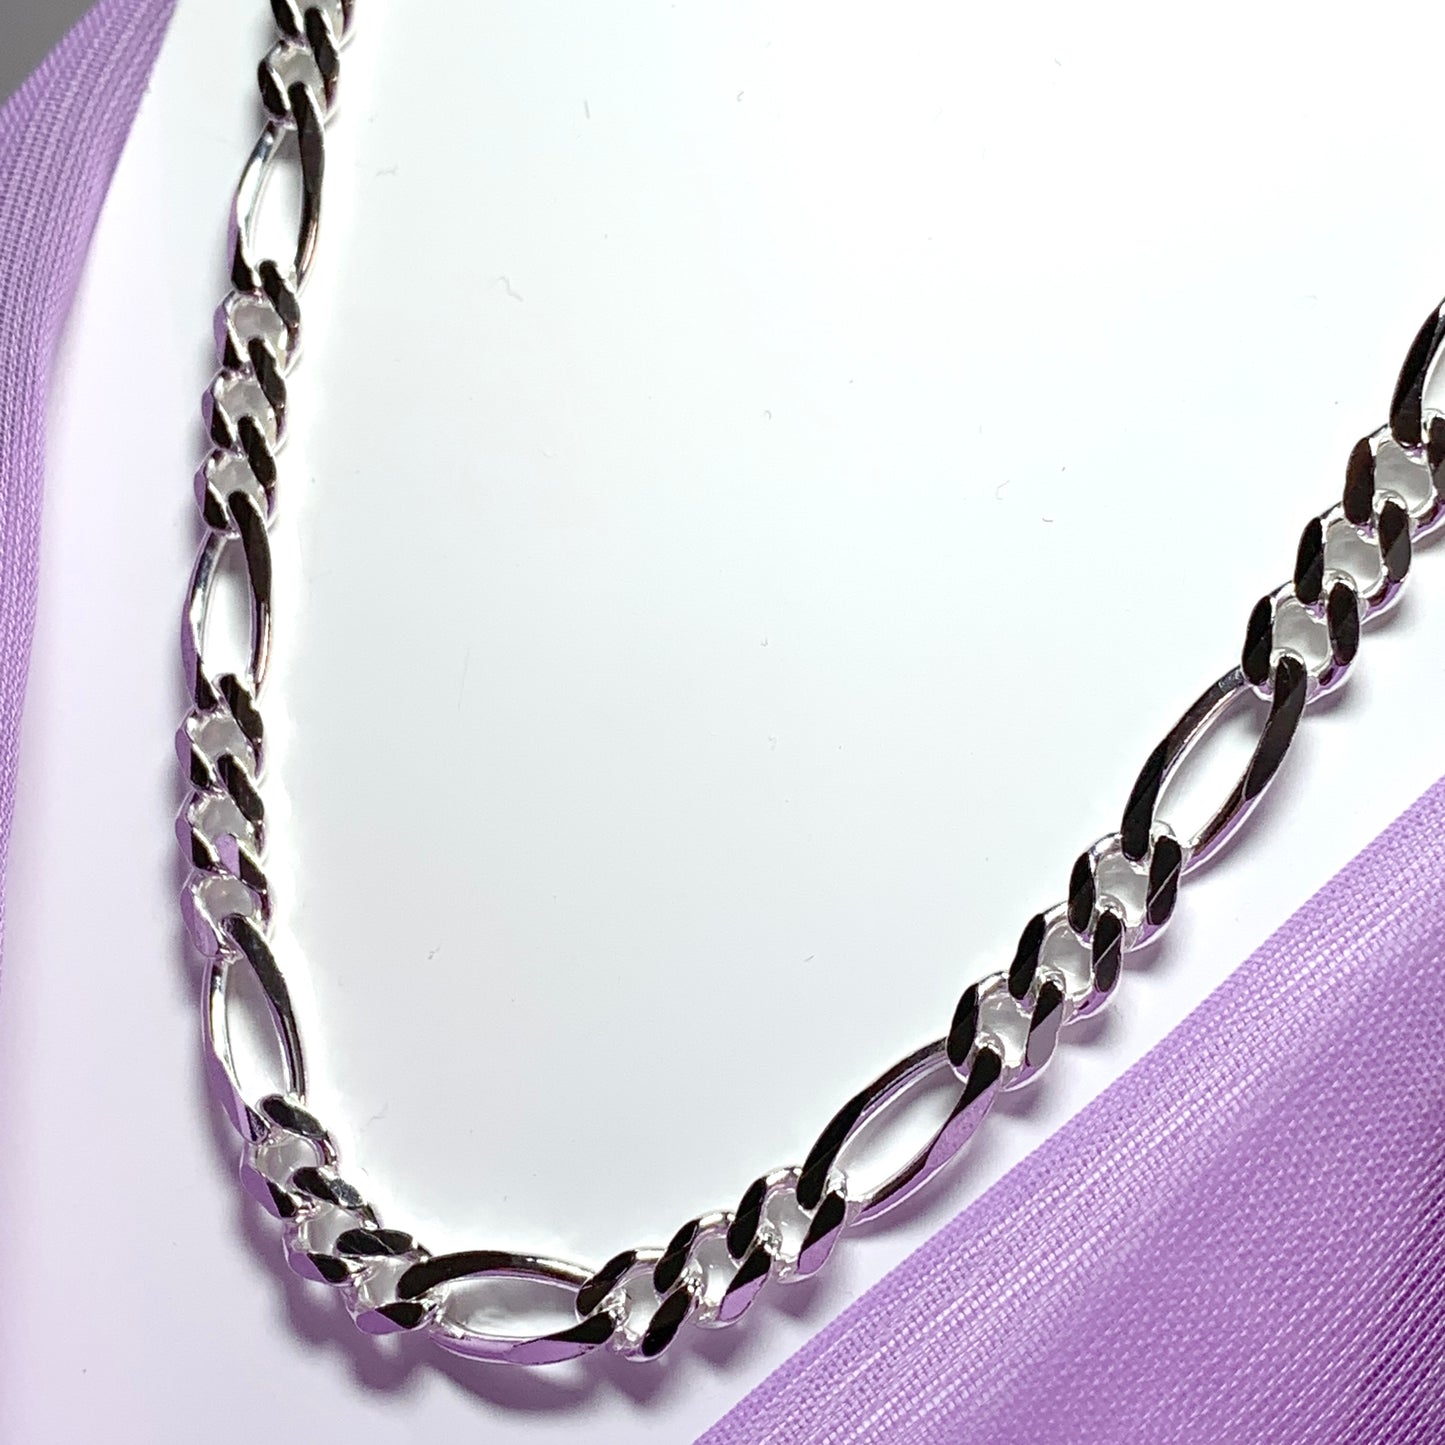 Men's 3 + 1 Figaro sterling silver men’s solid chain necklace